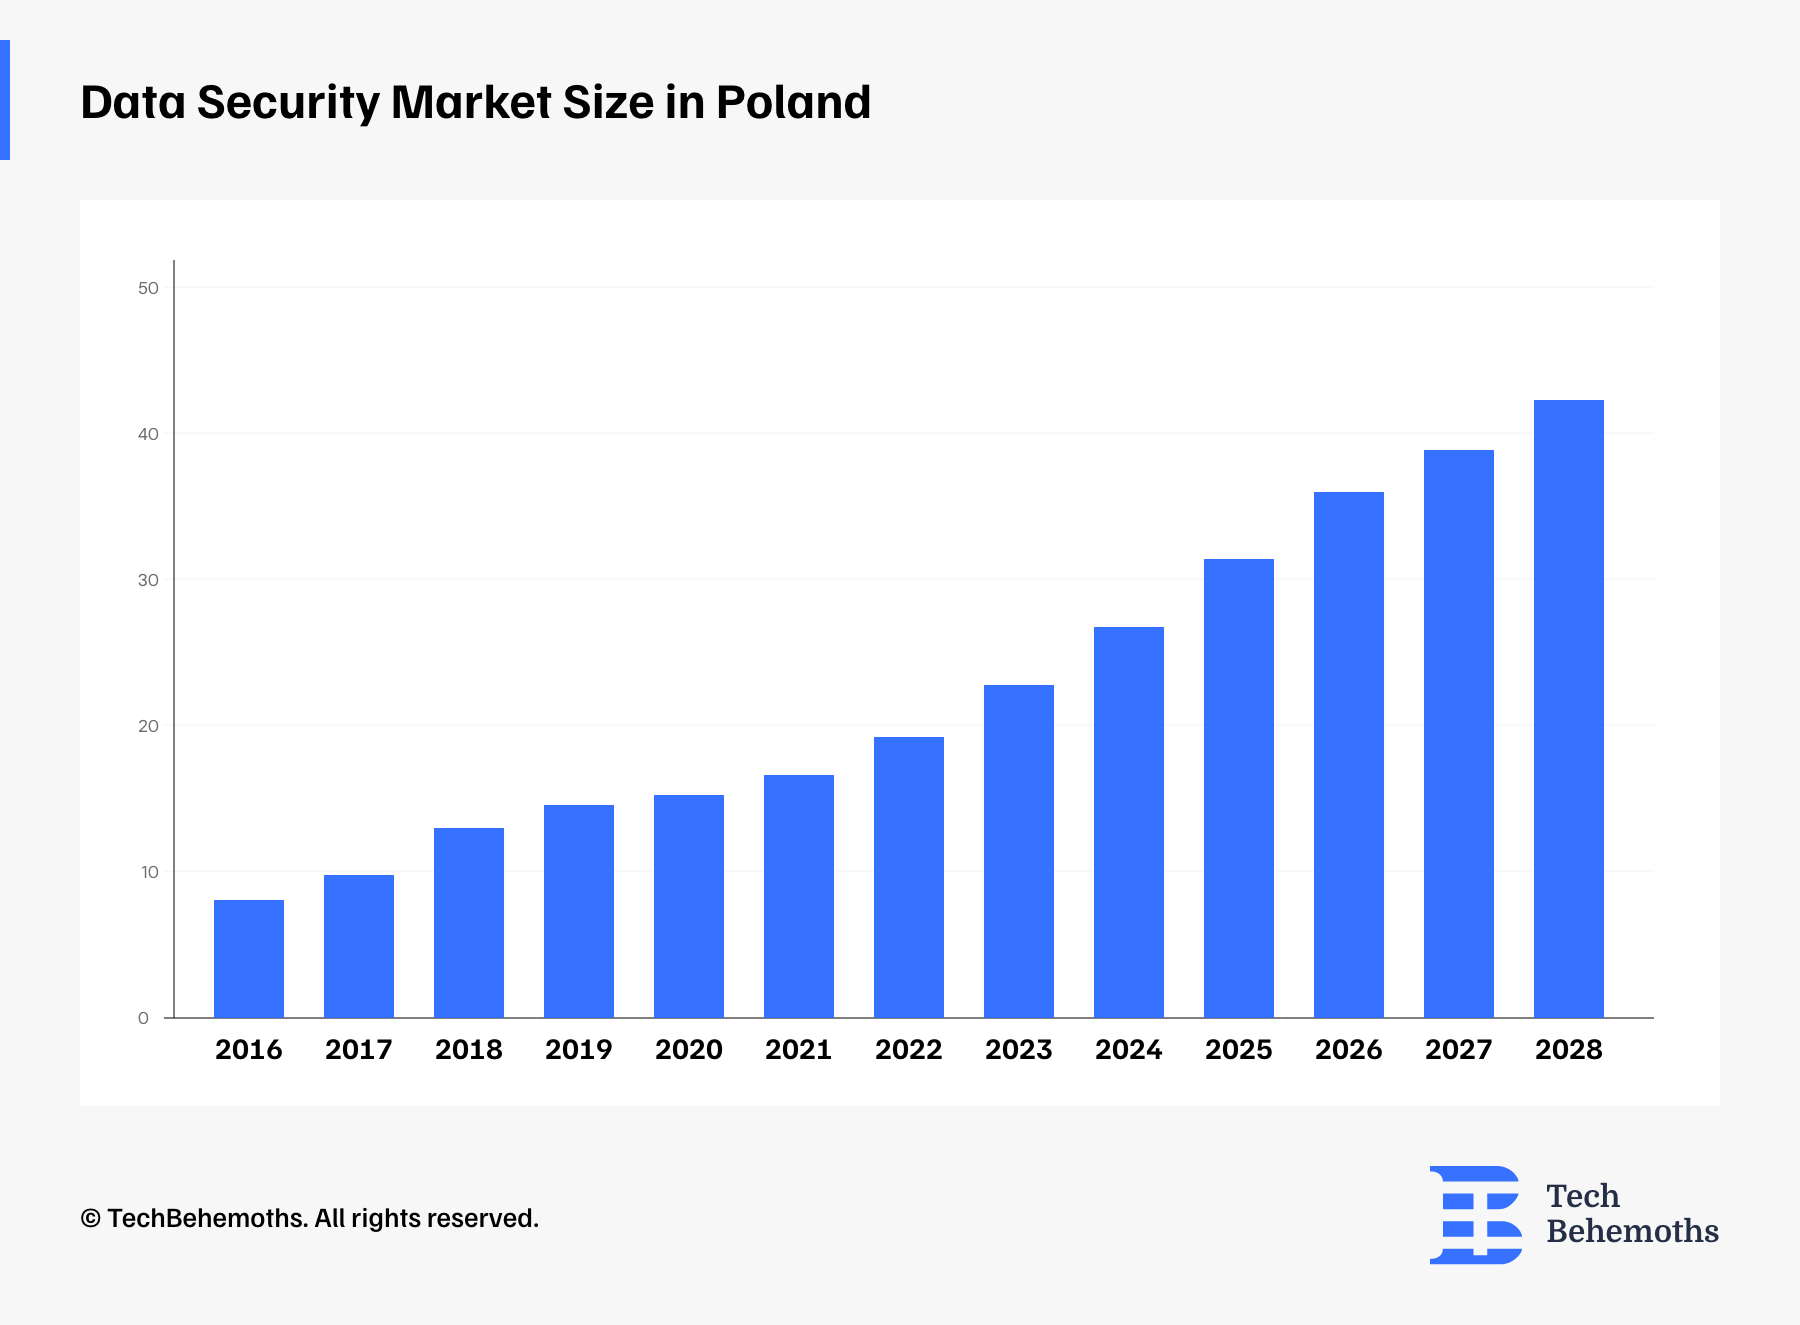 Data Security Market Size in Poland